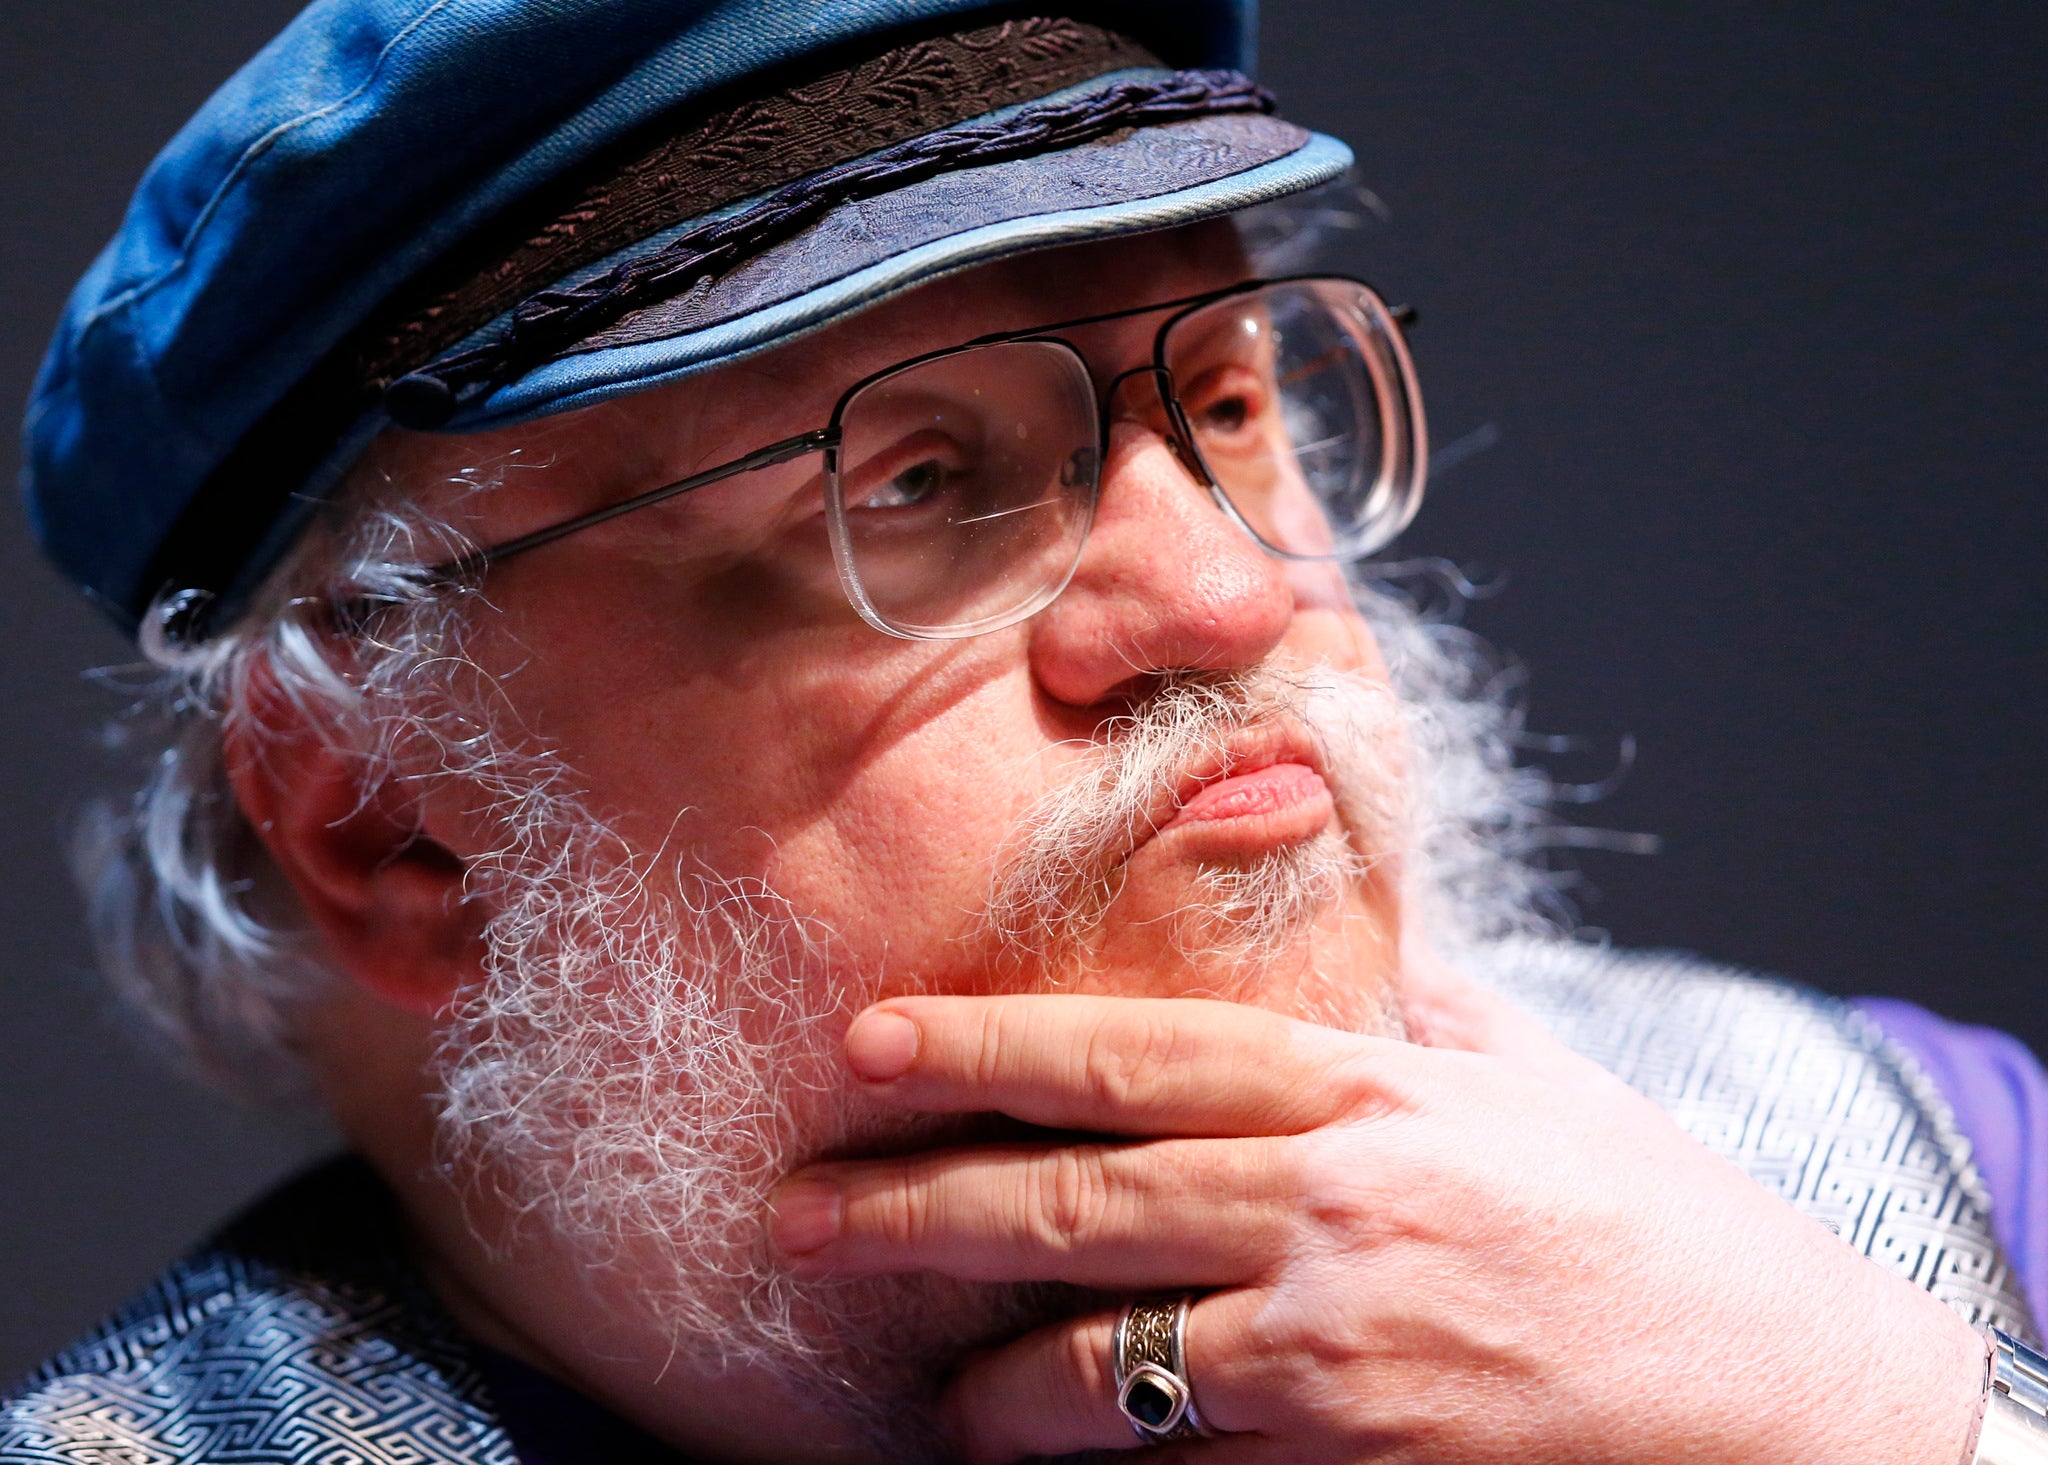 Game of Thrones author George R R Martin has a response on hand for those Scottish independence questions